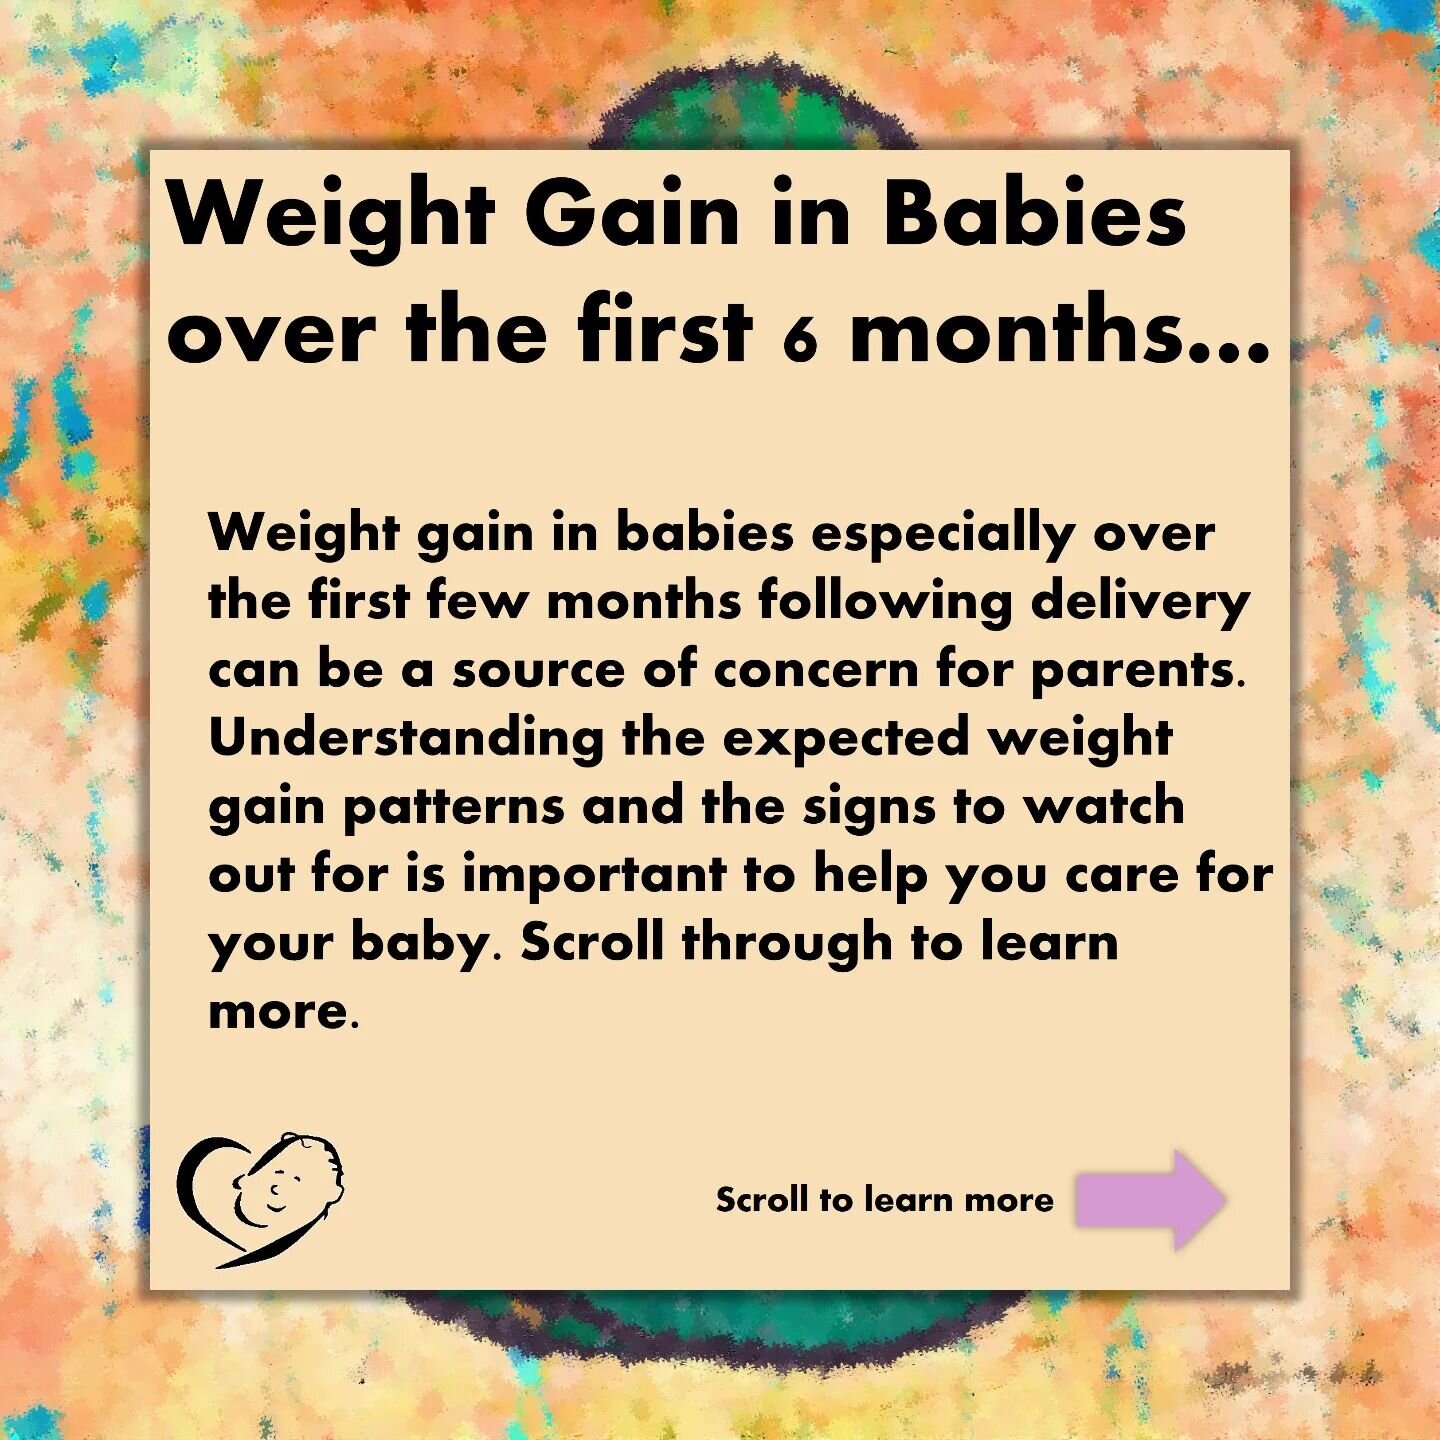 Weight gain in babies is something that concerns a lot of parents as its the main indicator of good health and adequate milk intake. Scroll through the carousel to learn what to expect over the first few months and know when to ask for help.

Tah a f